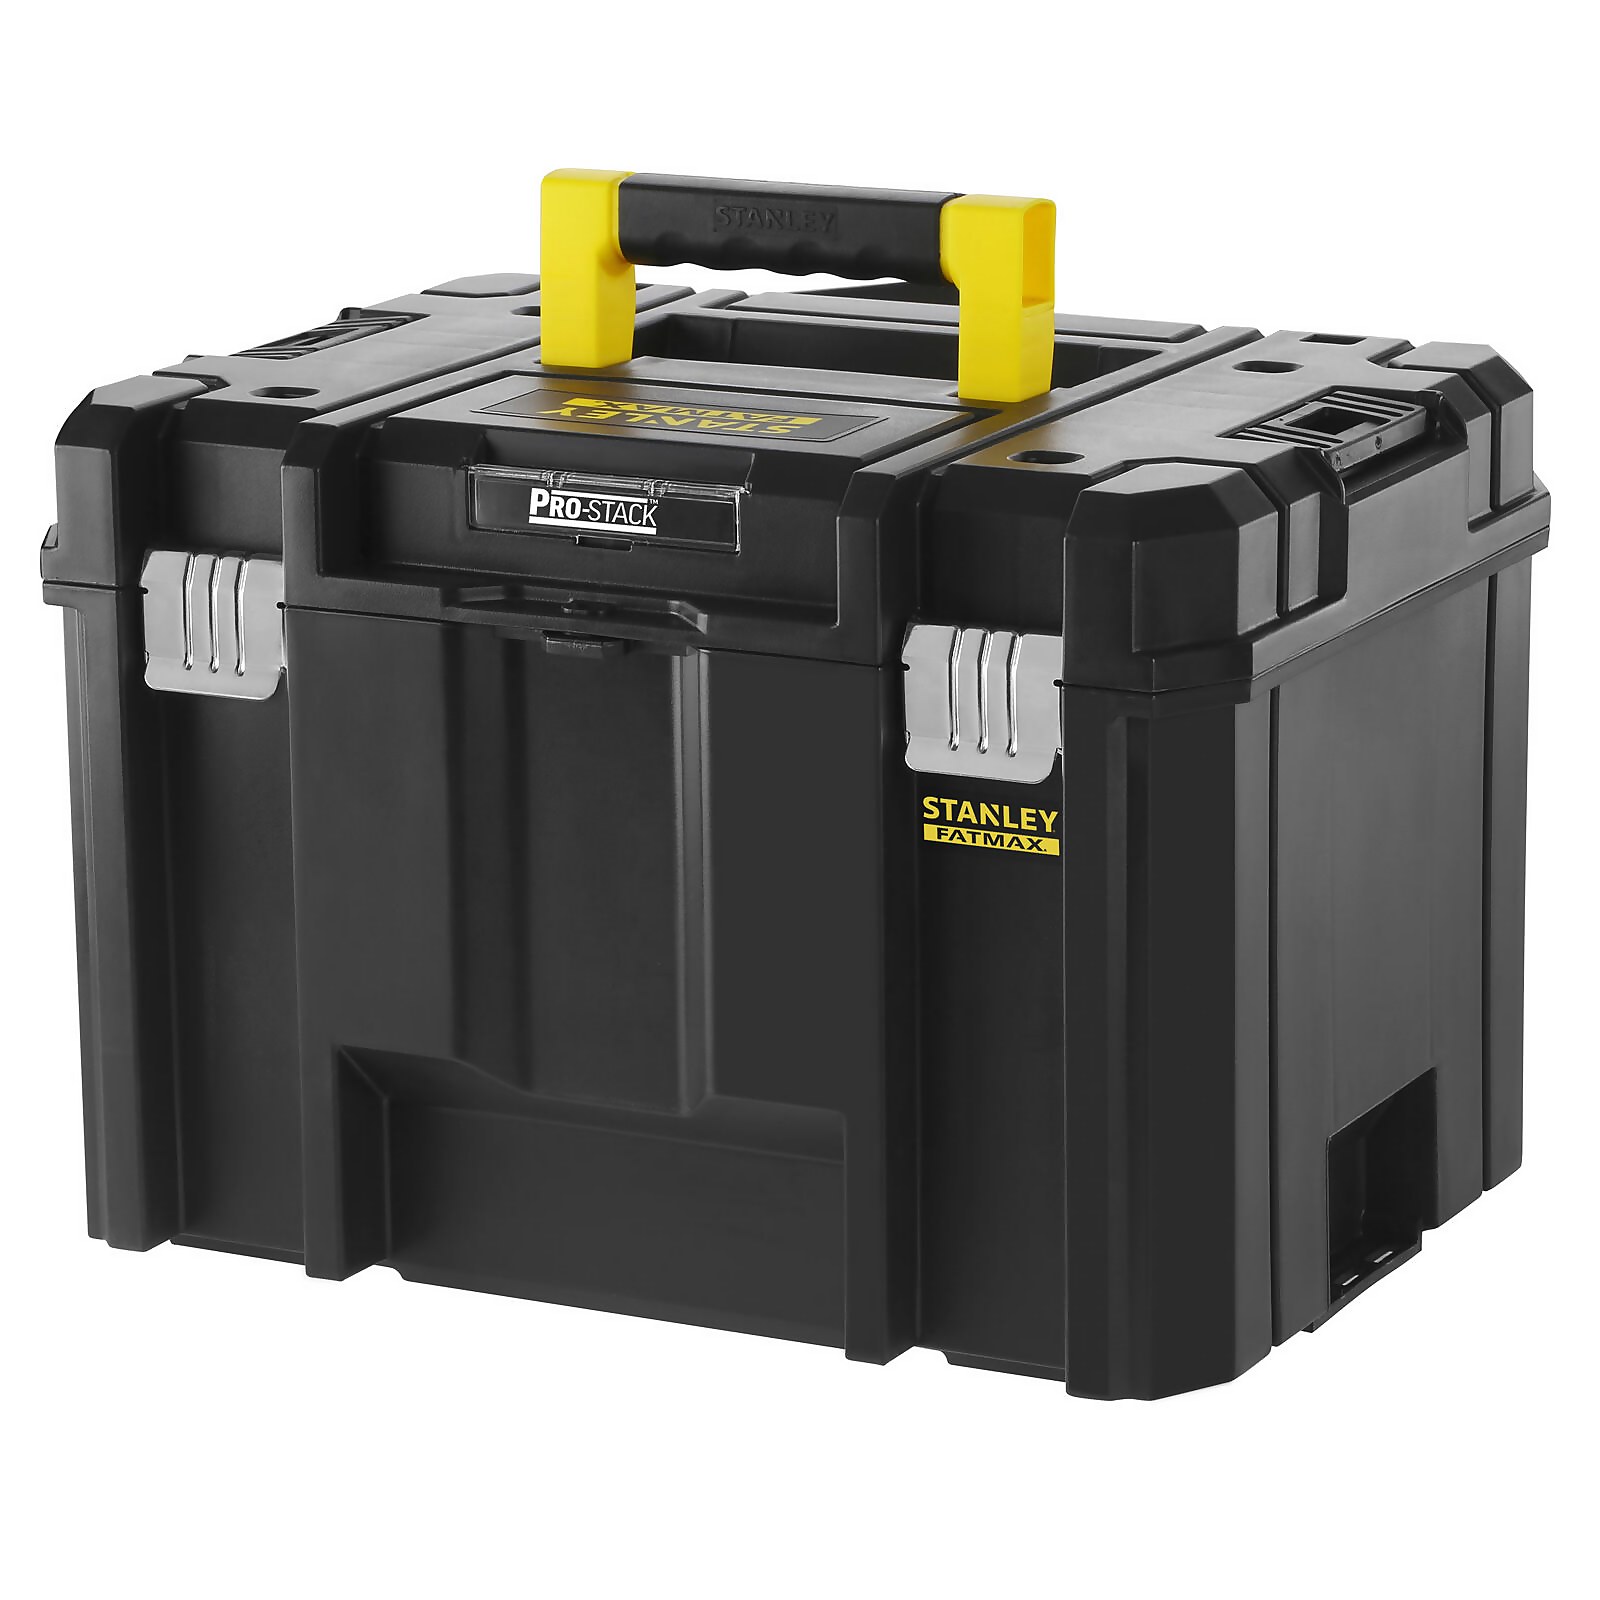 Photo of Stanley Fatmax Pro-stack Deep Toolbox